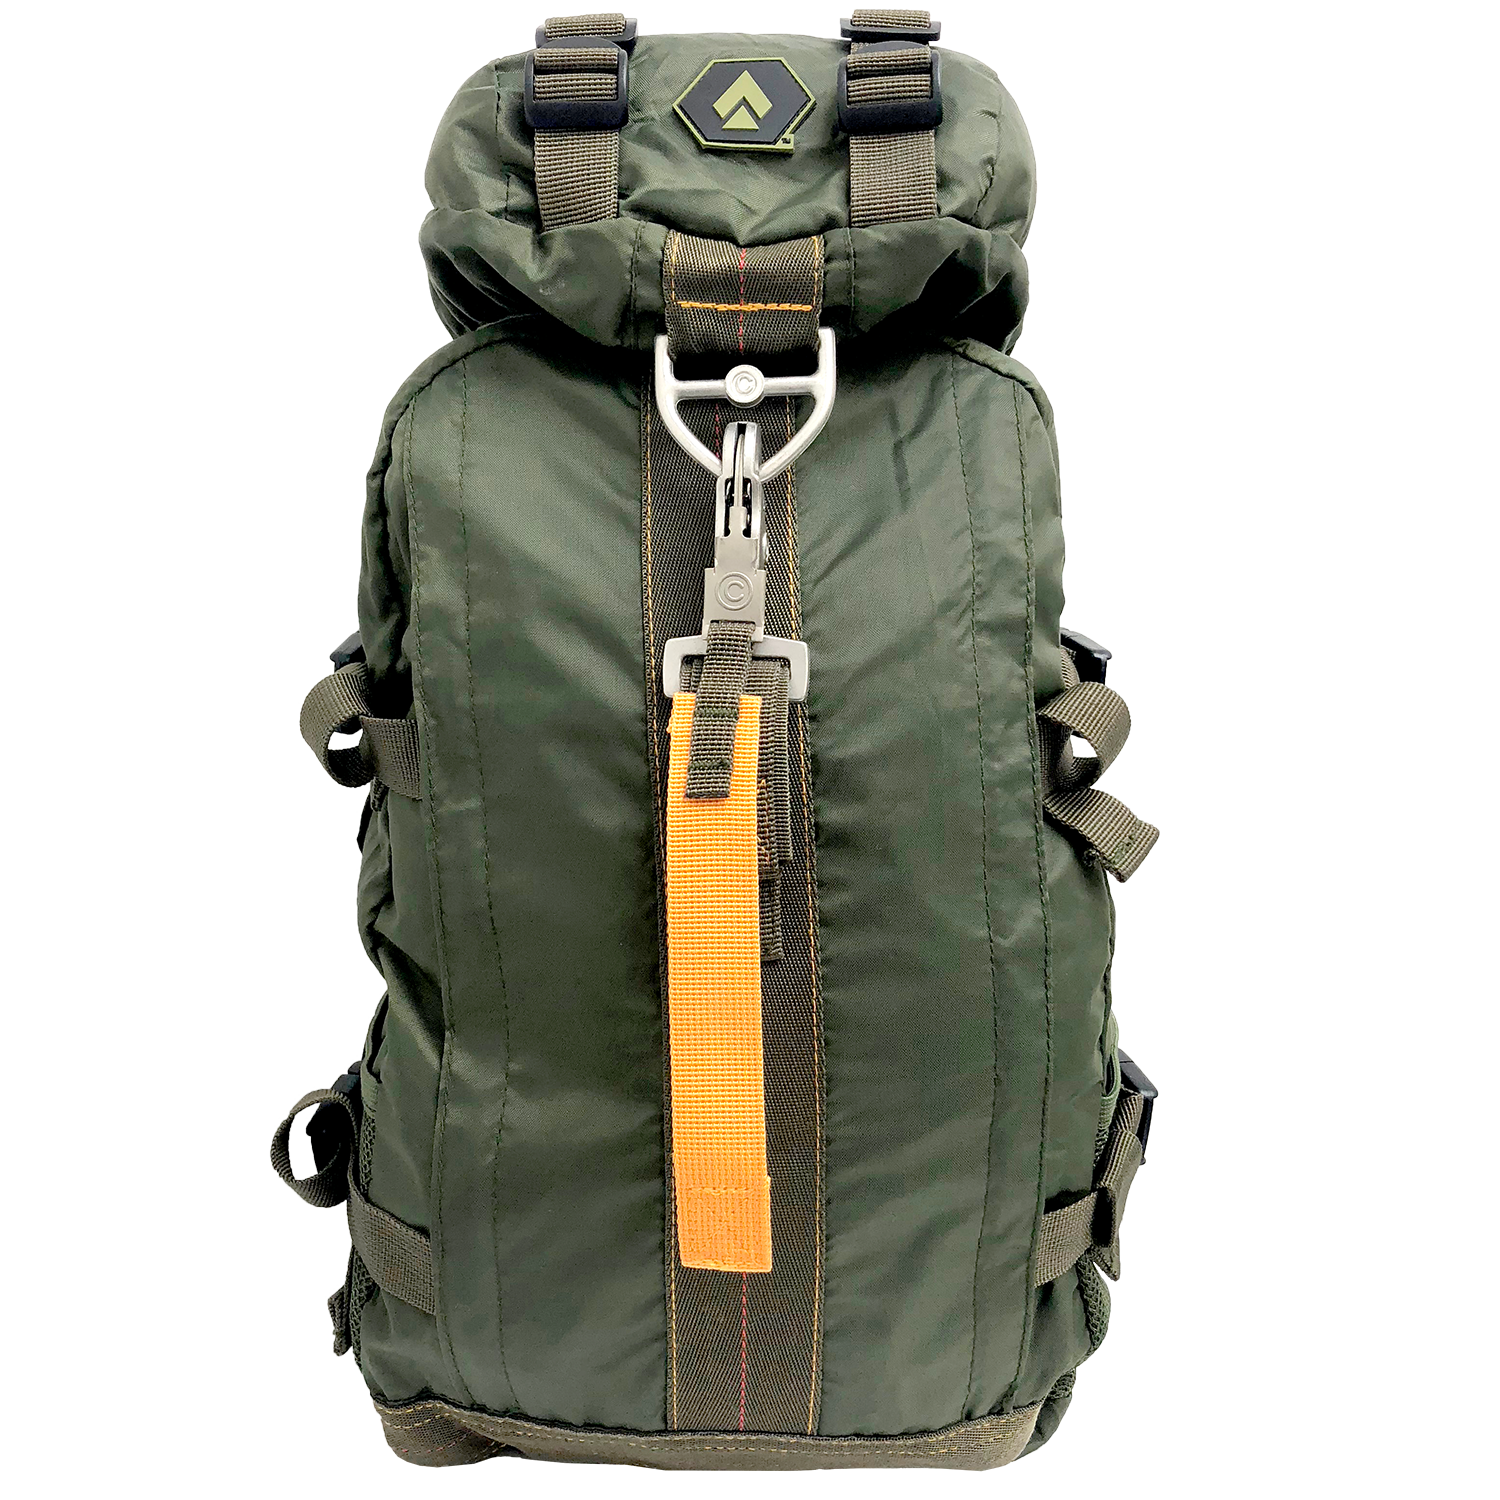 Military Backpack PNG HD Quality